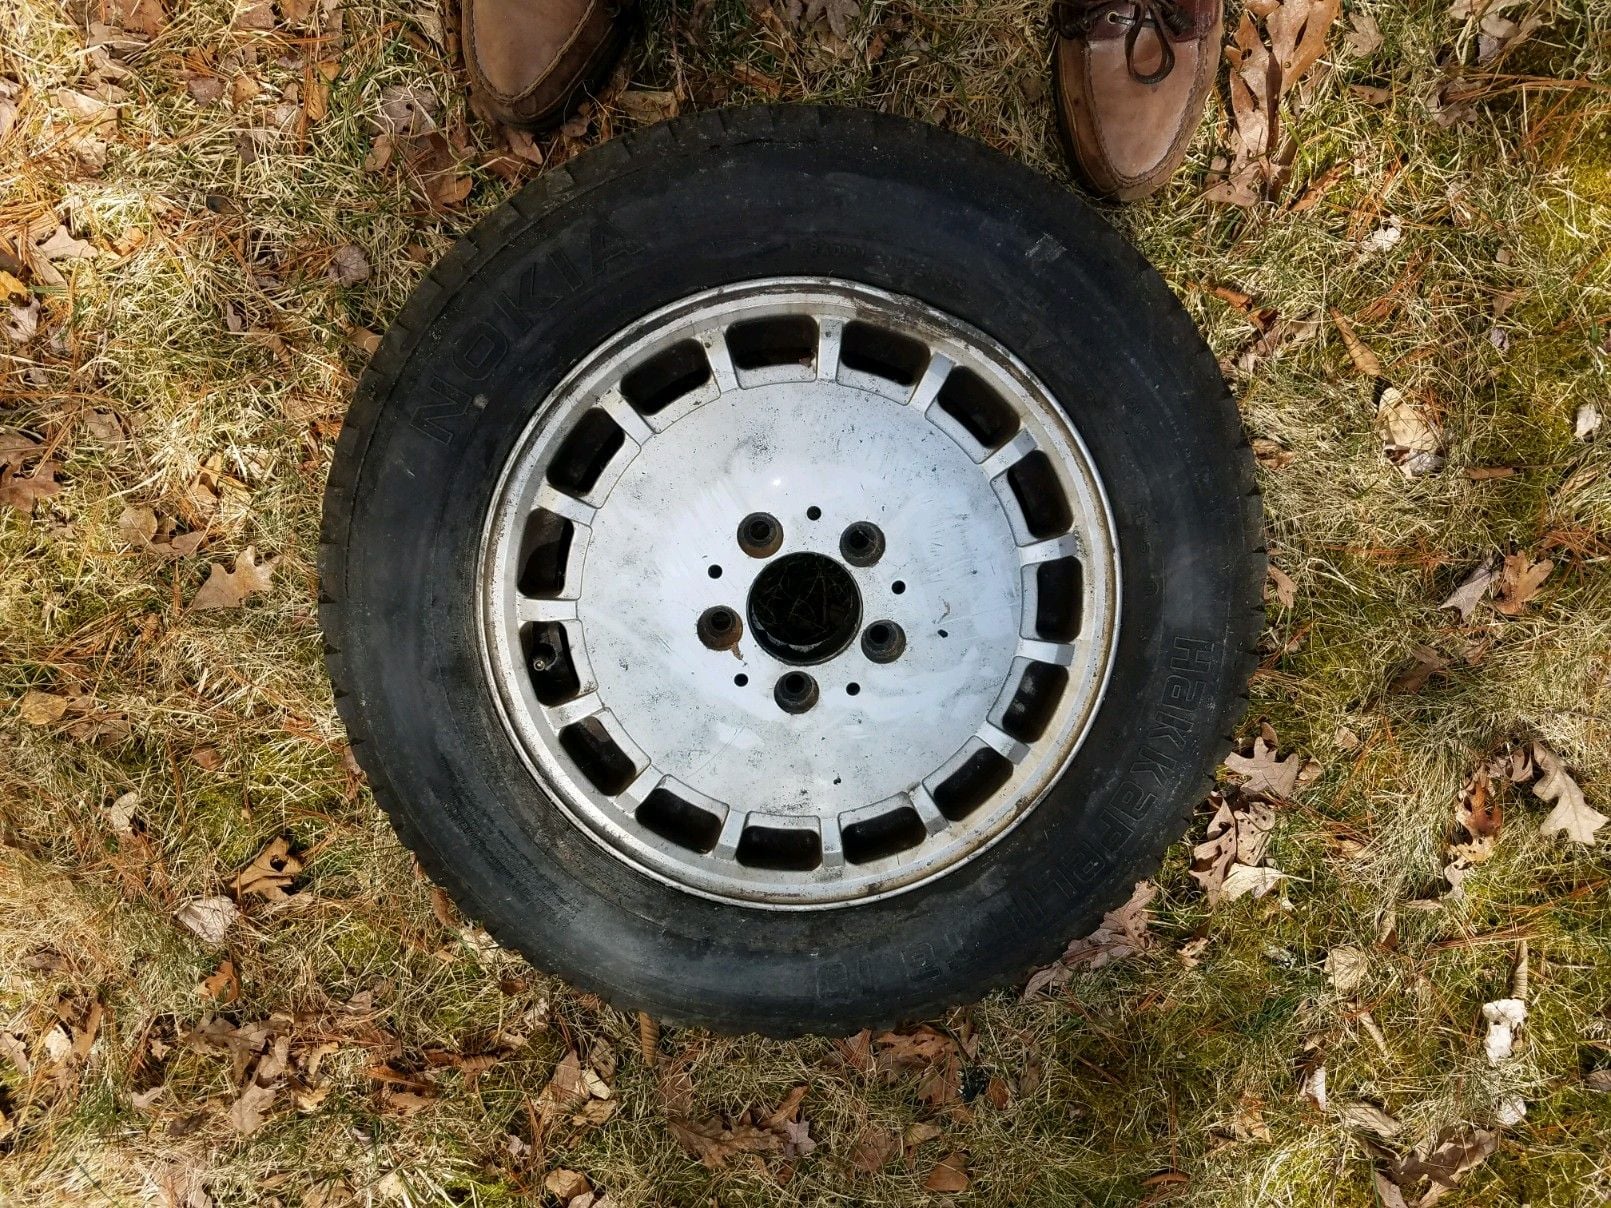 Wheels and Tires/Axles - 4 rims (and crappy tires) from a 1989 300E - Used - 1989 Mercedes-Benz 300E - Dartmouth, MA 02748, United States